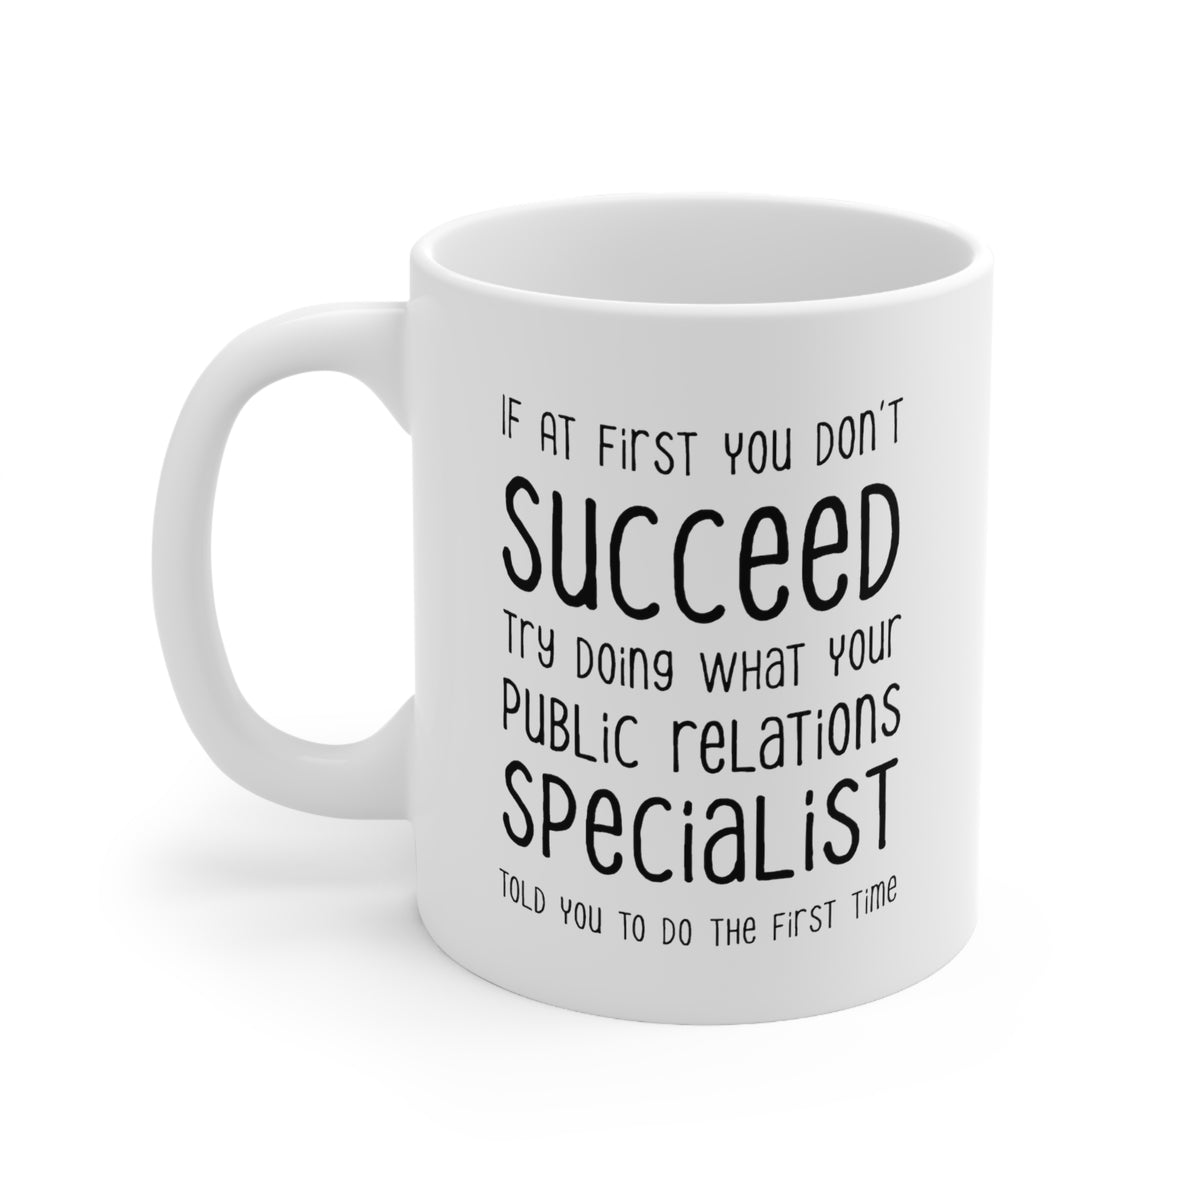 Public relations specialist Coffee Mug - Doing What Your Public relations specialist Told You - Funny Sarcasm Gifts for Men and Women